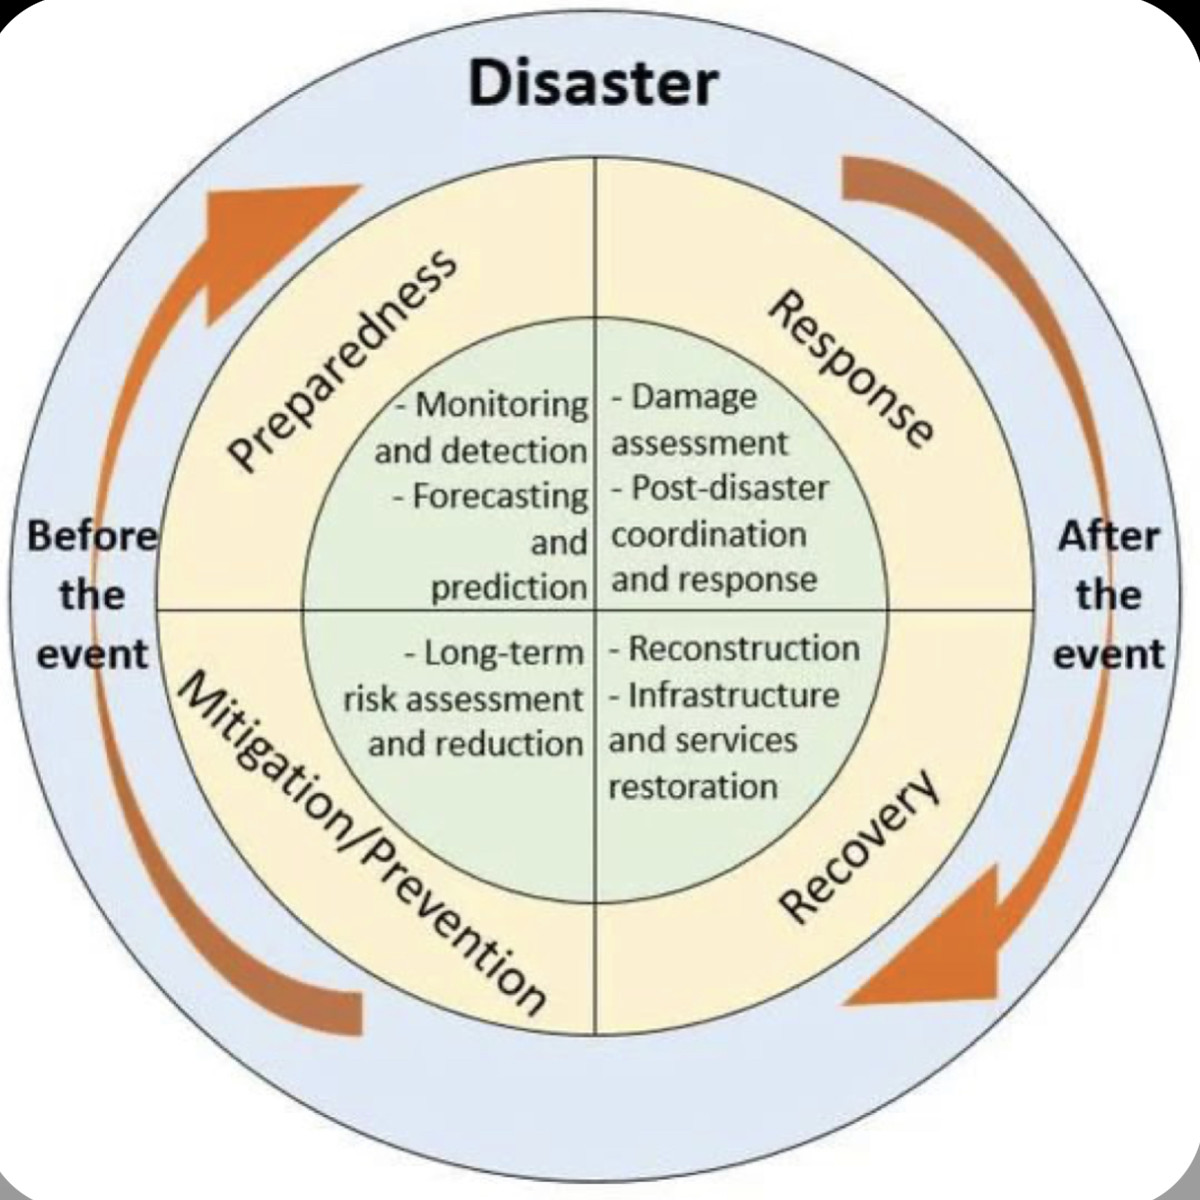 Prevention of Disaster / Risk Events